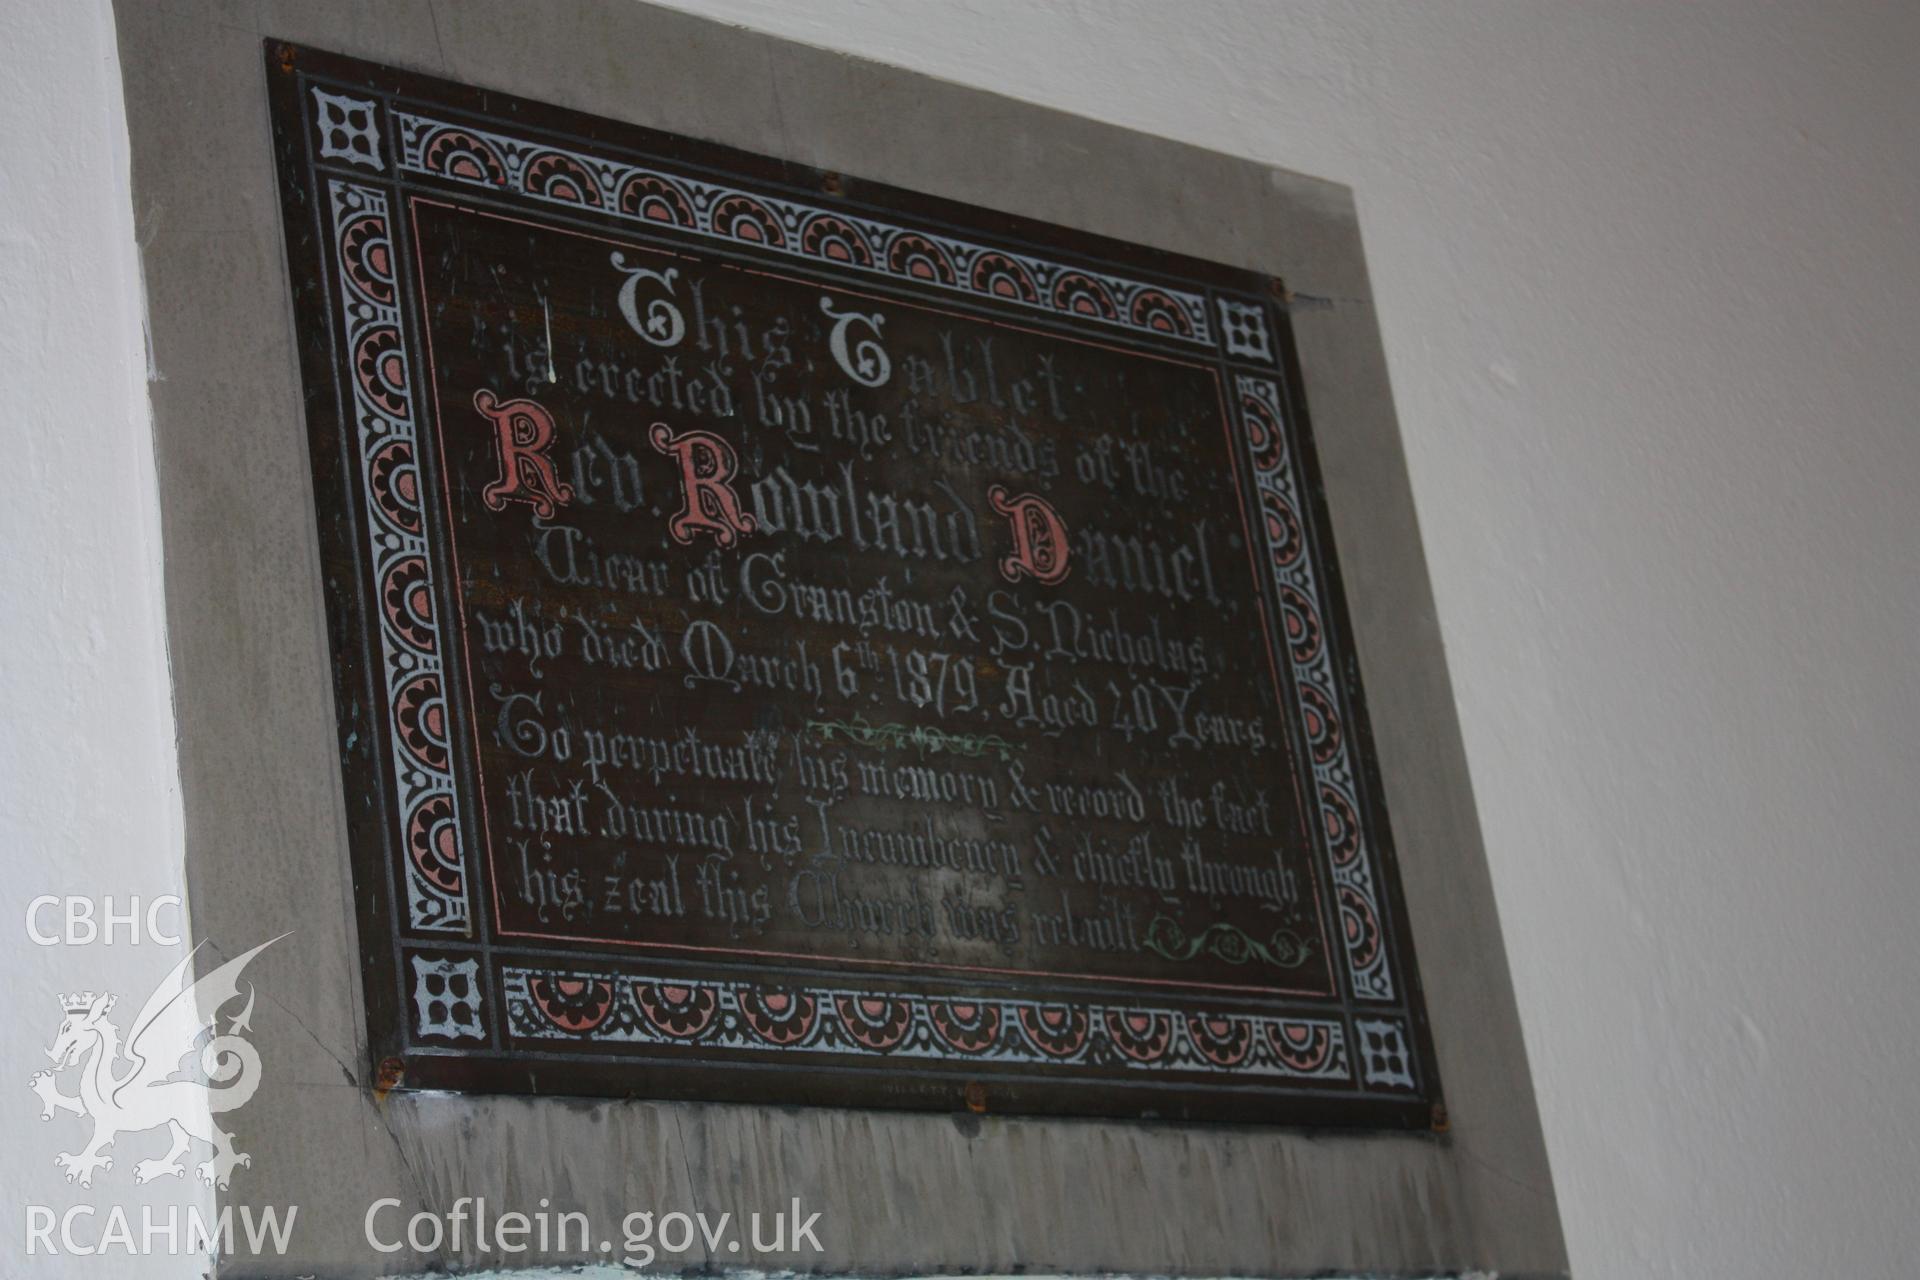 Memorial tablet for the Rev Rowland Daniel who oversaw the rebuilding of the church but died 6 March 1879 aged only 40 years